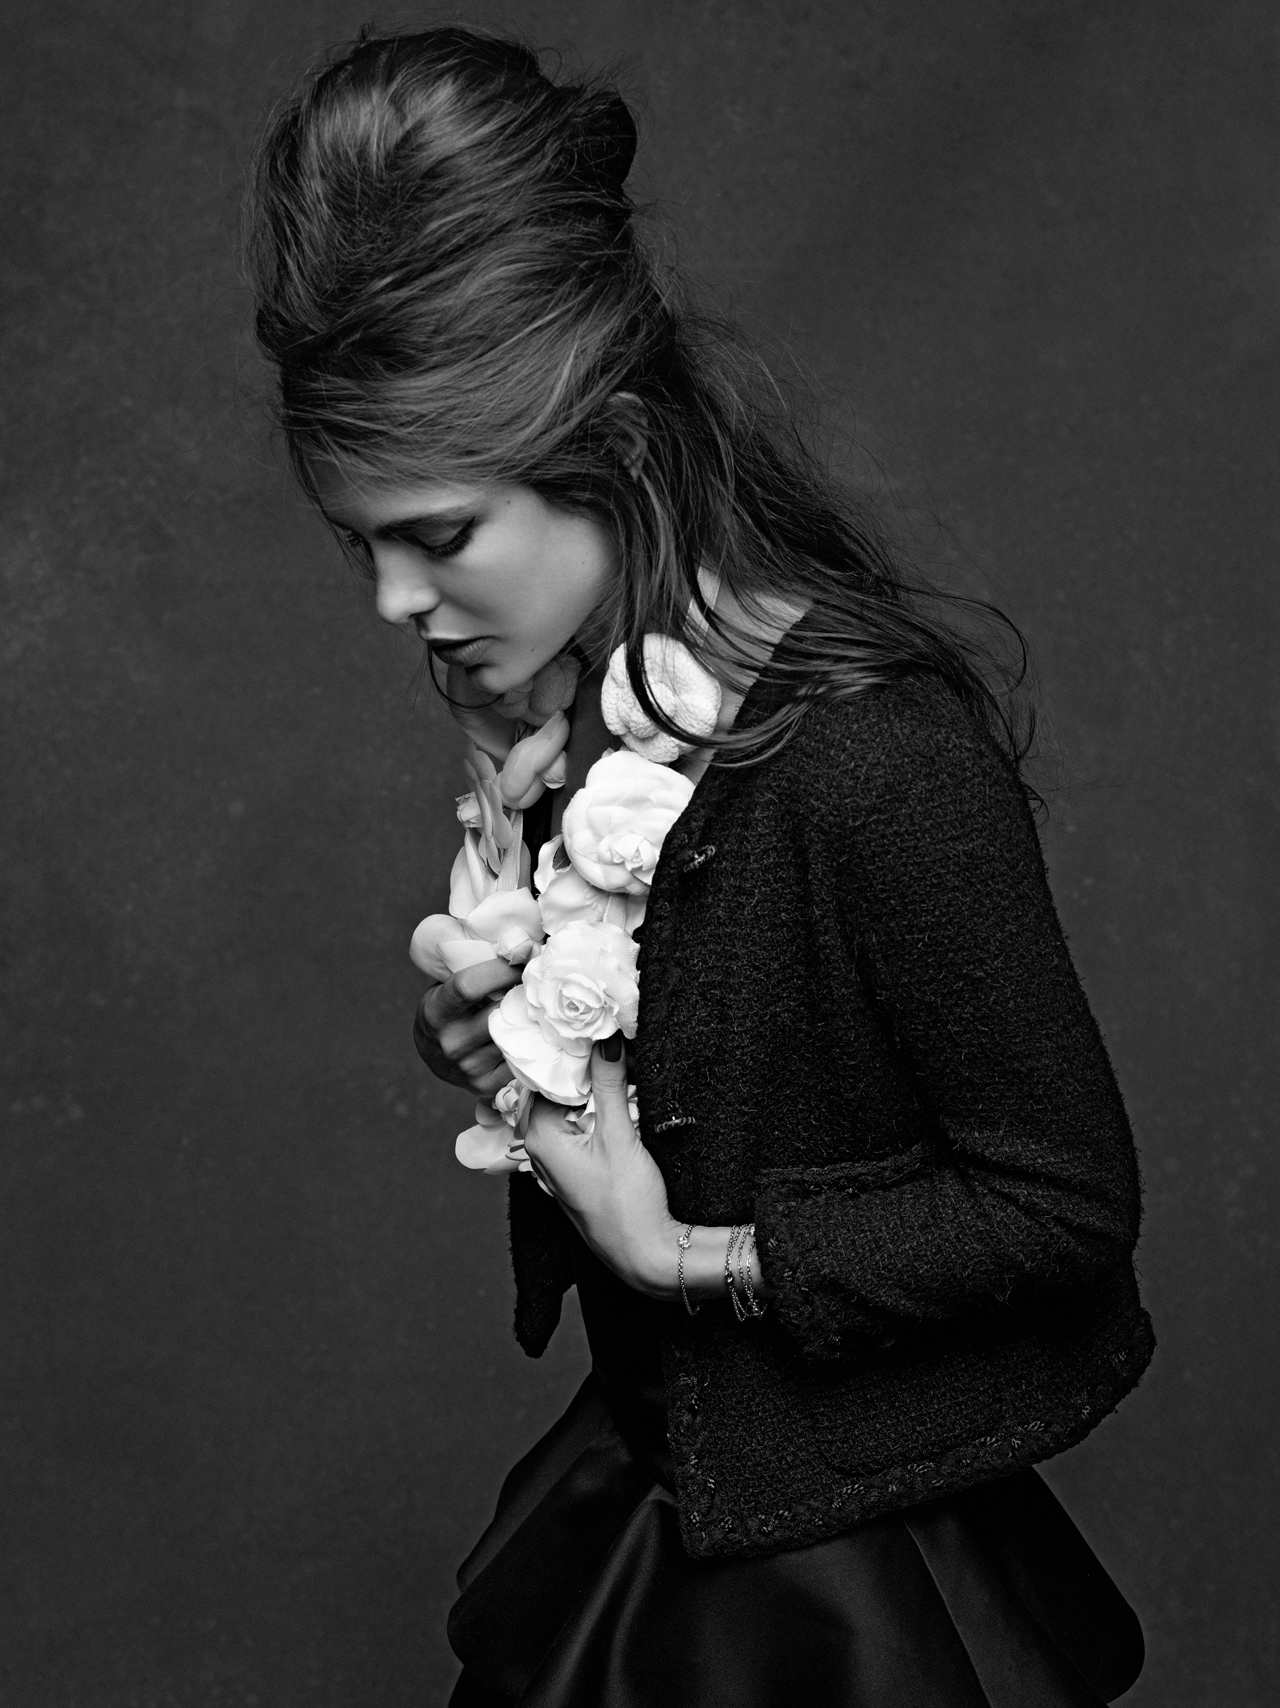 Charlotte_Casiraghi_The Little Black Jacket CHANEL's classic revisited by Karl Lagerfeld and Carine Roitfeld, Steidl 2012